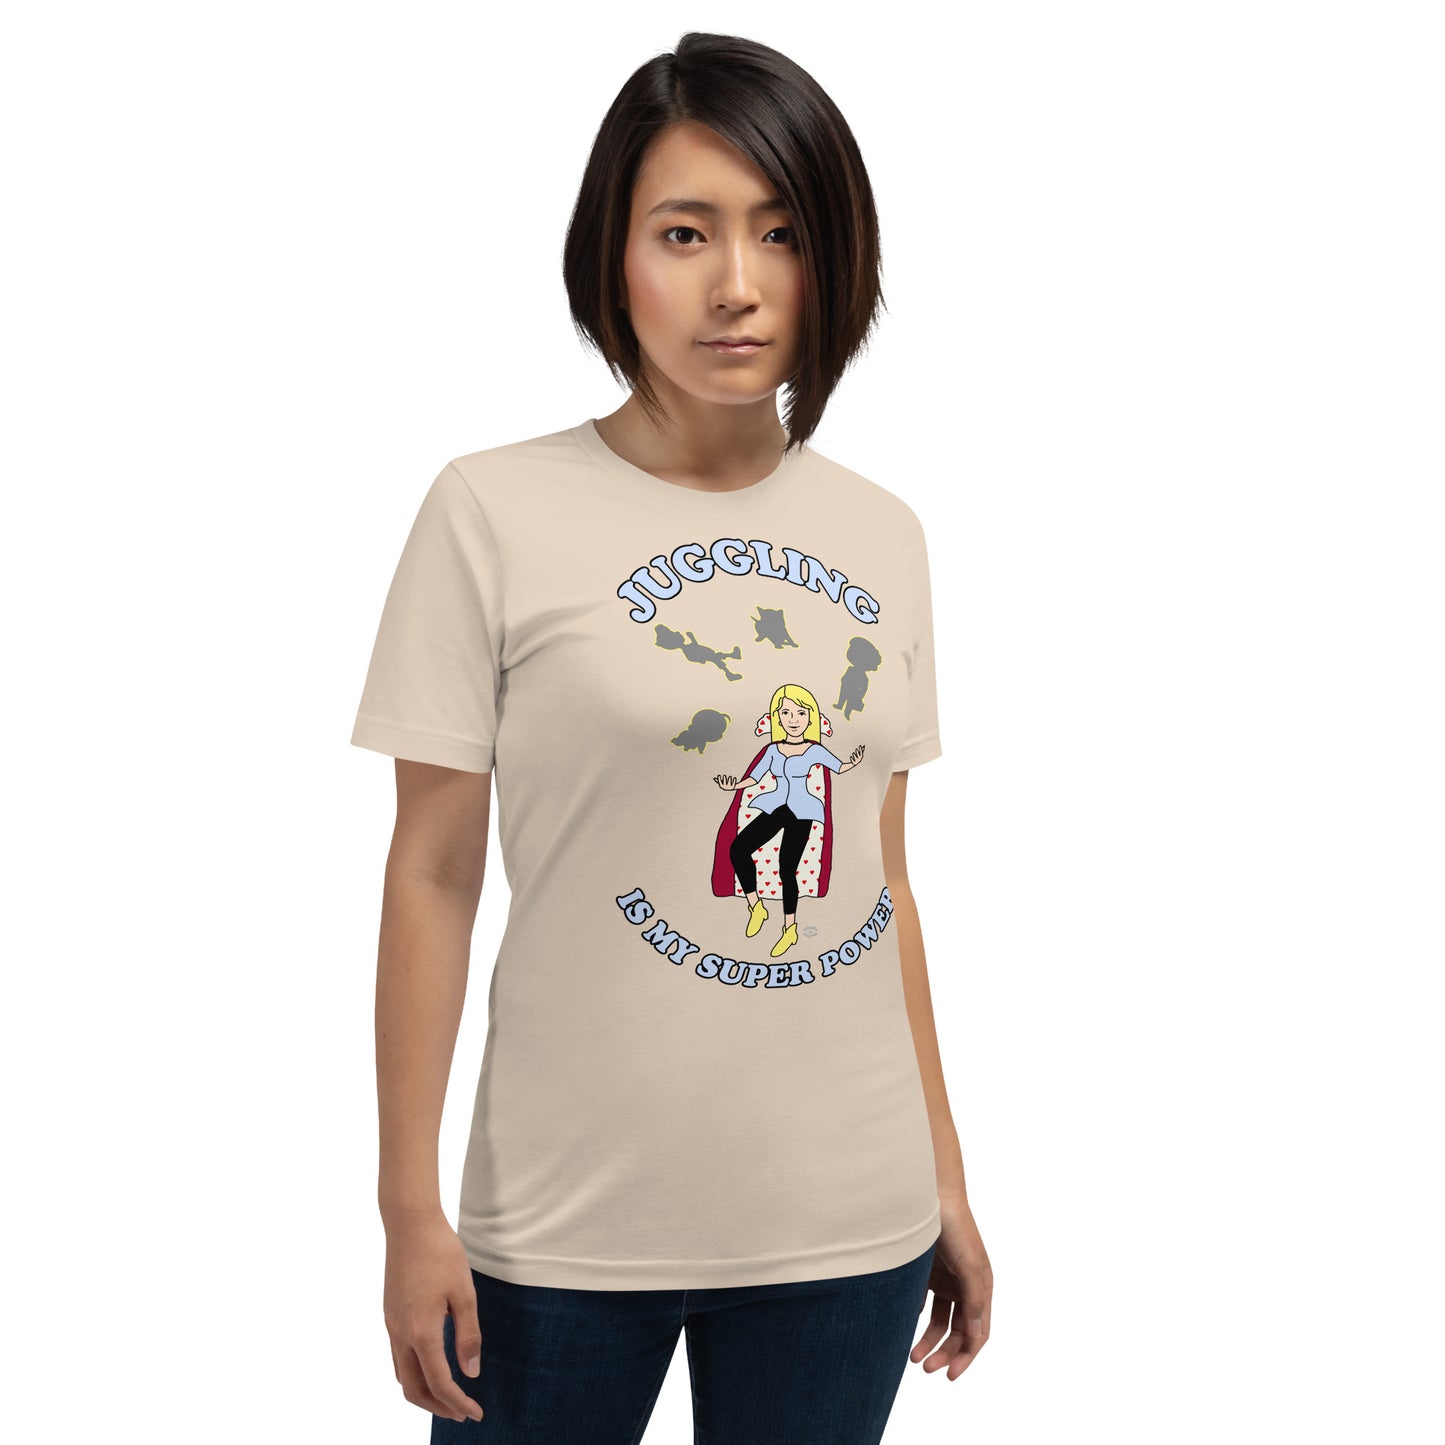 A women wearing a unisex short sleeve tshirt which has on the front a cartoon women in a cape juggling her family like a jester and the text Juggling Is My Super Power - front - soft cream